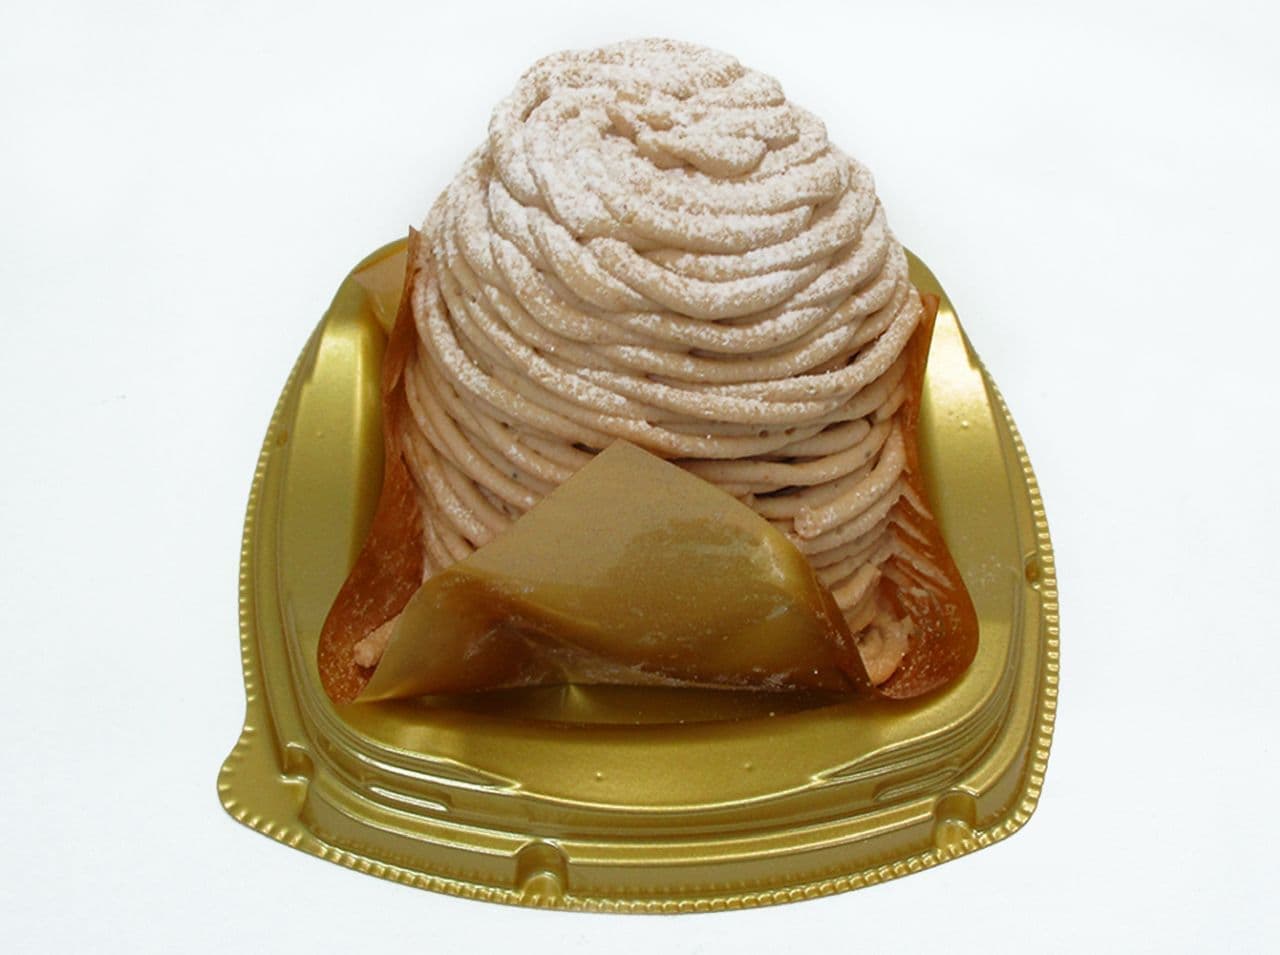 7-ELEVEN "Mont Blanc with Italian Chestnuts